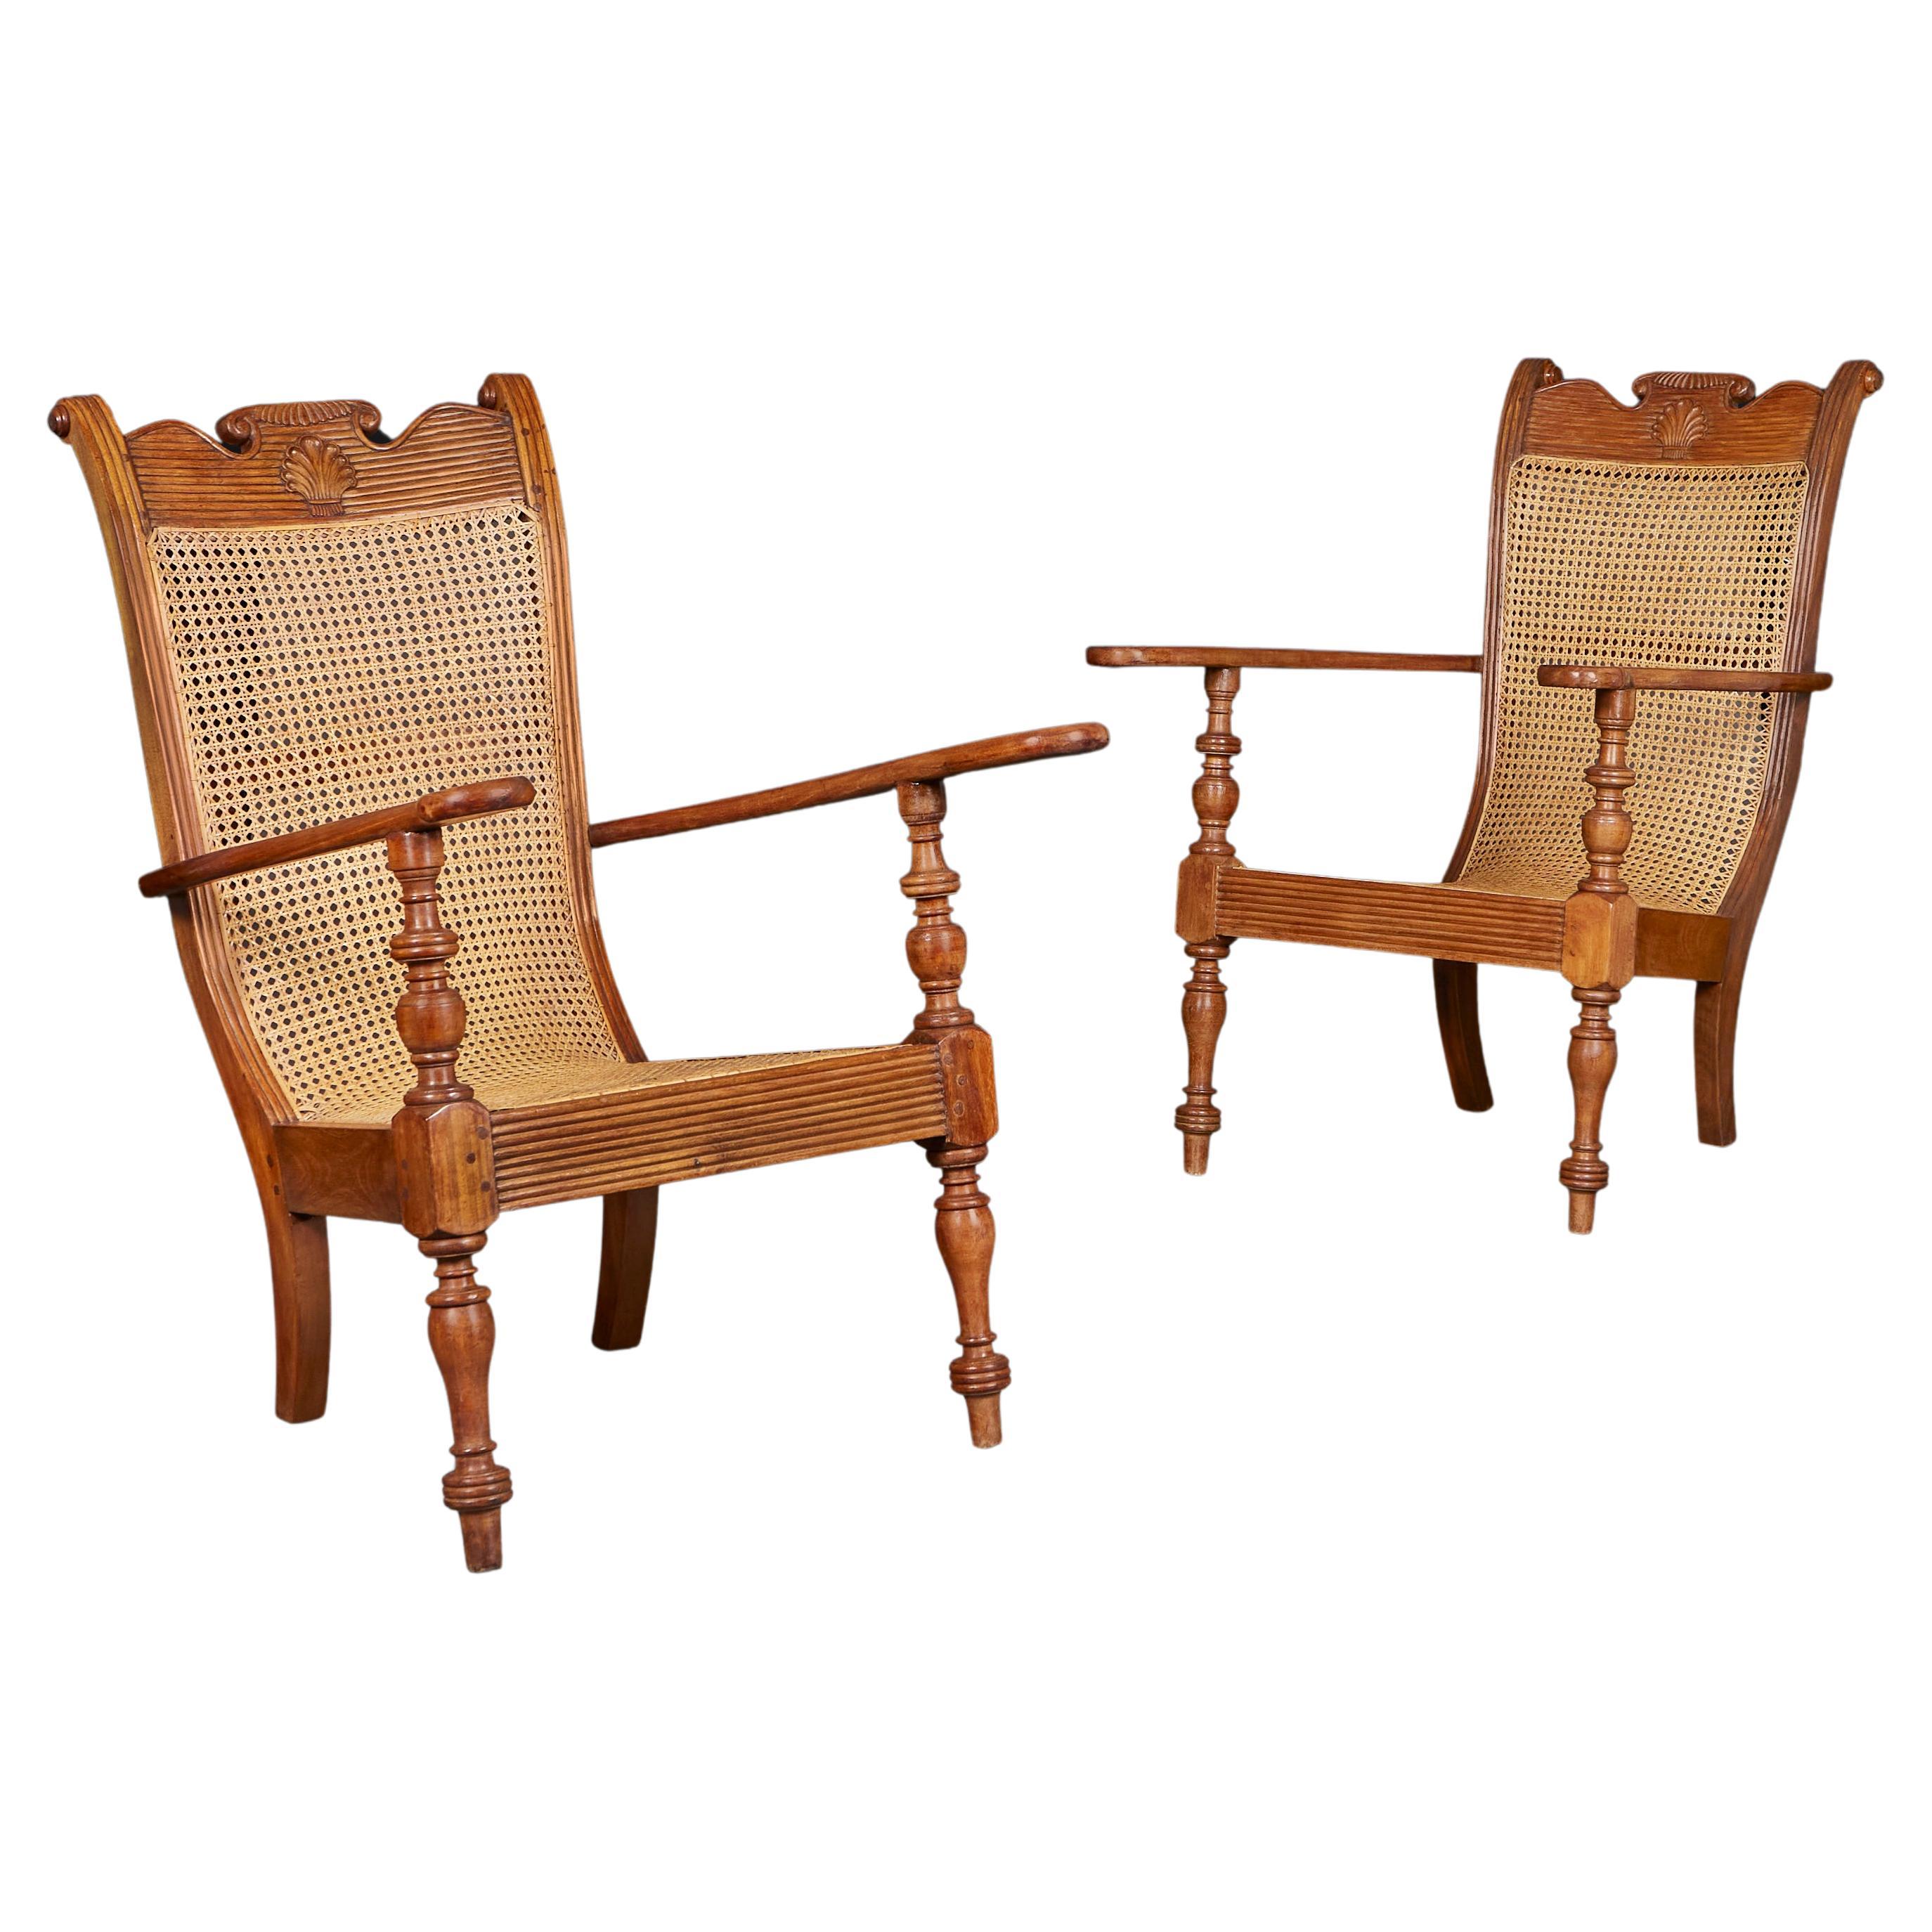 A Pair of Sri Lankan Teak and Cane Planters Chairs  For Sale